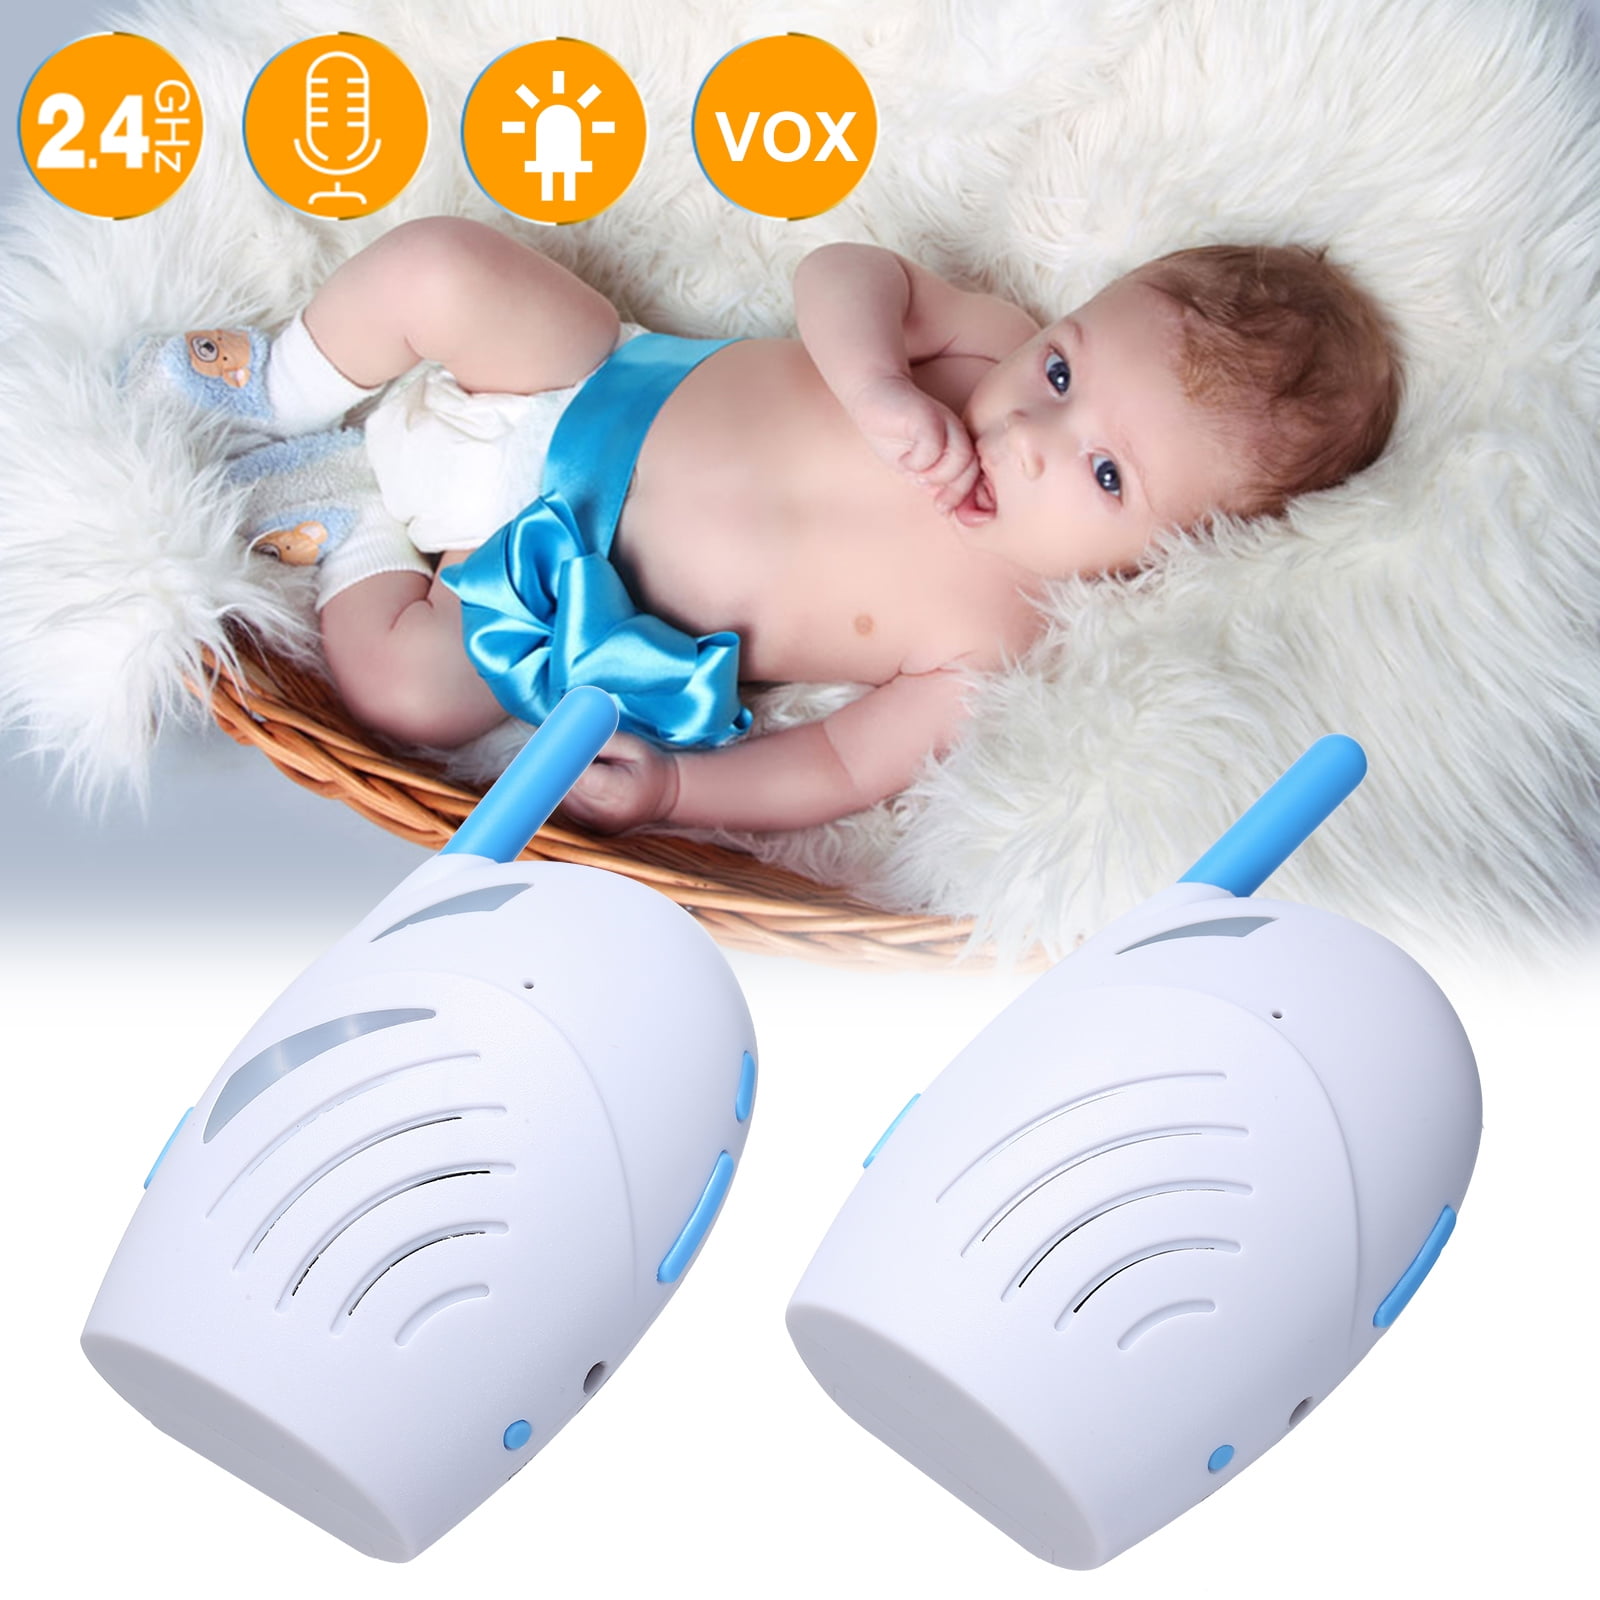 Portable 2.4 GHz Digital Security Audio Baby Monitor Two Way Talk Crystal Clear 